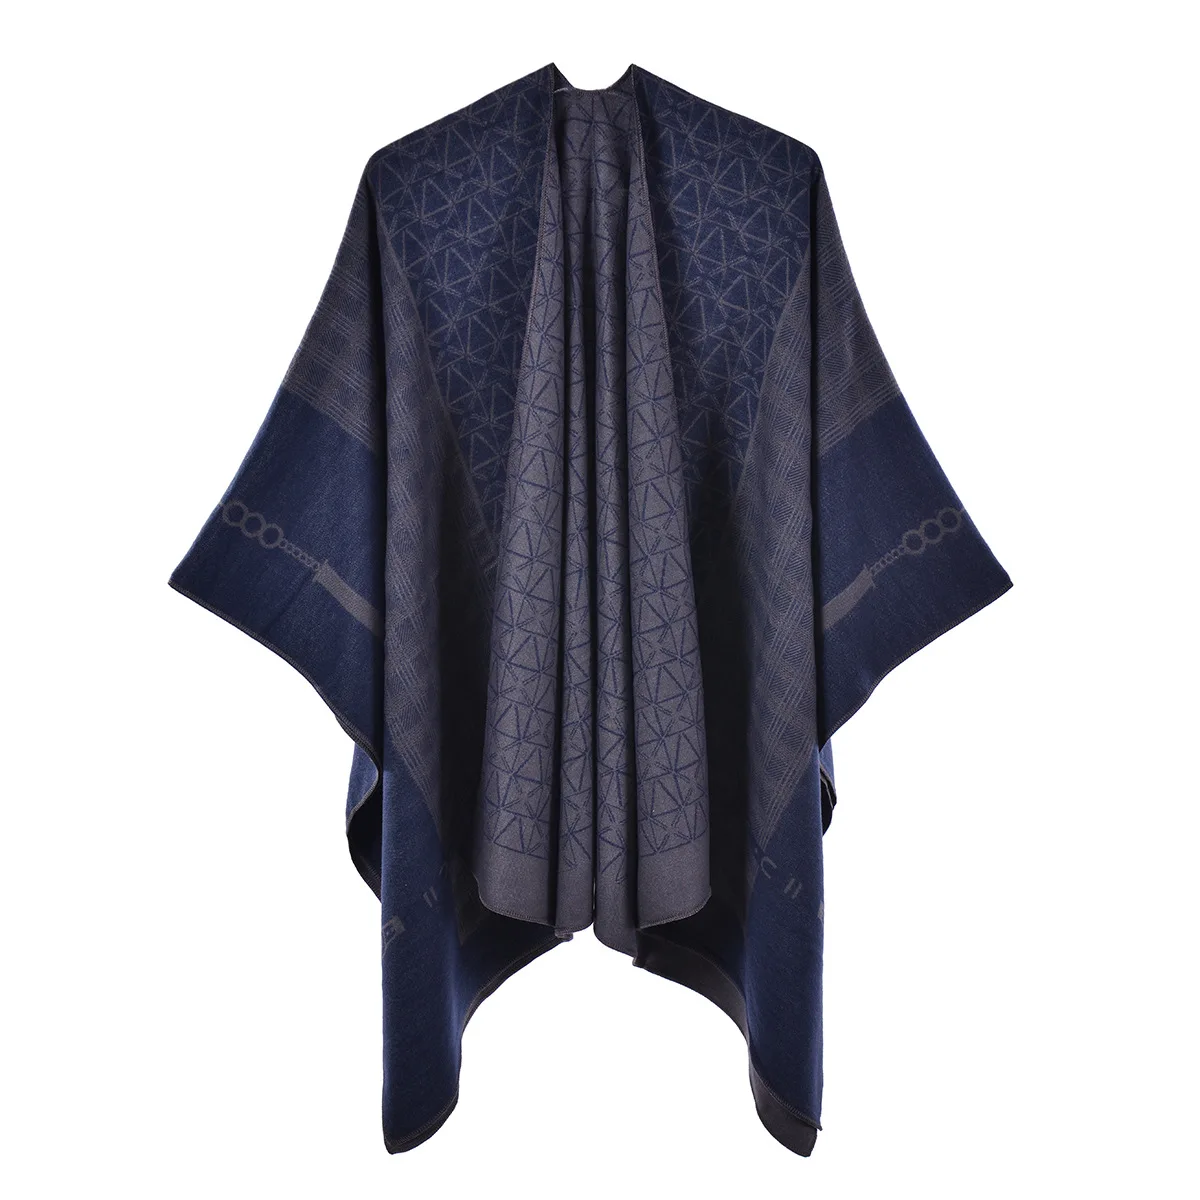 

New Check Pattern Cape Autumn Winter Travel Warm Scarf Imitation Cashmere Women Poncho Lady Capes Navy Cloaks